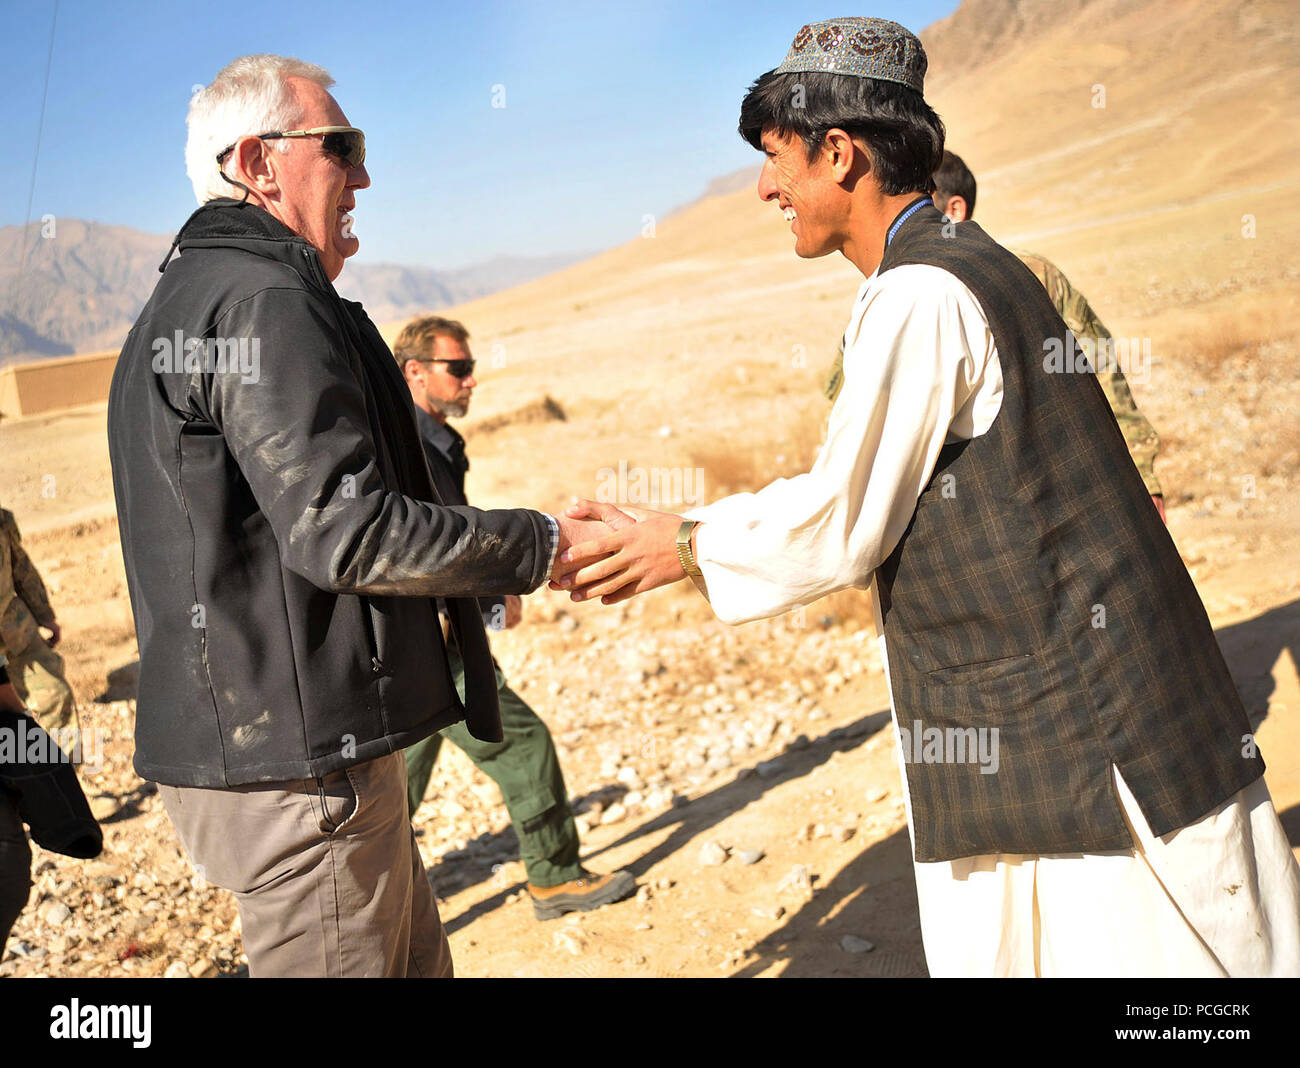 Australian Ambassador to Afghanistan, David Foley, greets a villager outside a radio station during a visit to Gizab district, Uruzgan province, Afghanistan, Dec. 29. Stock Photo